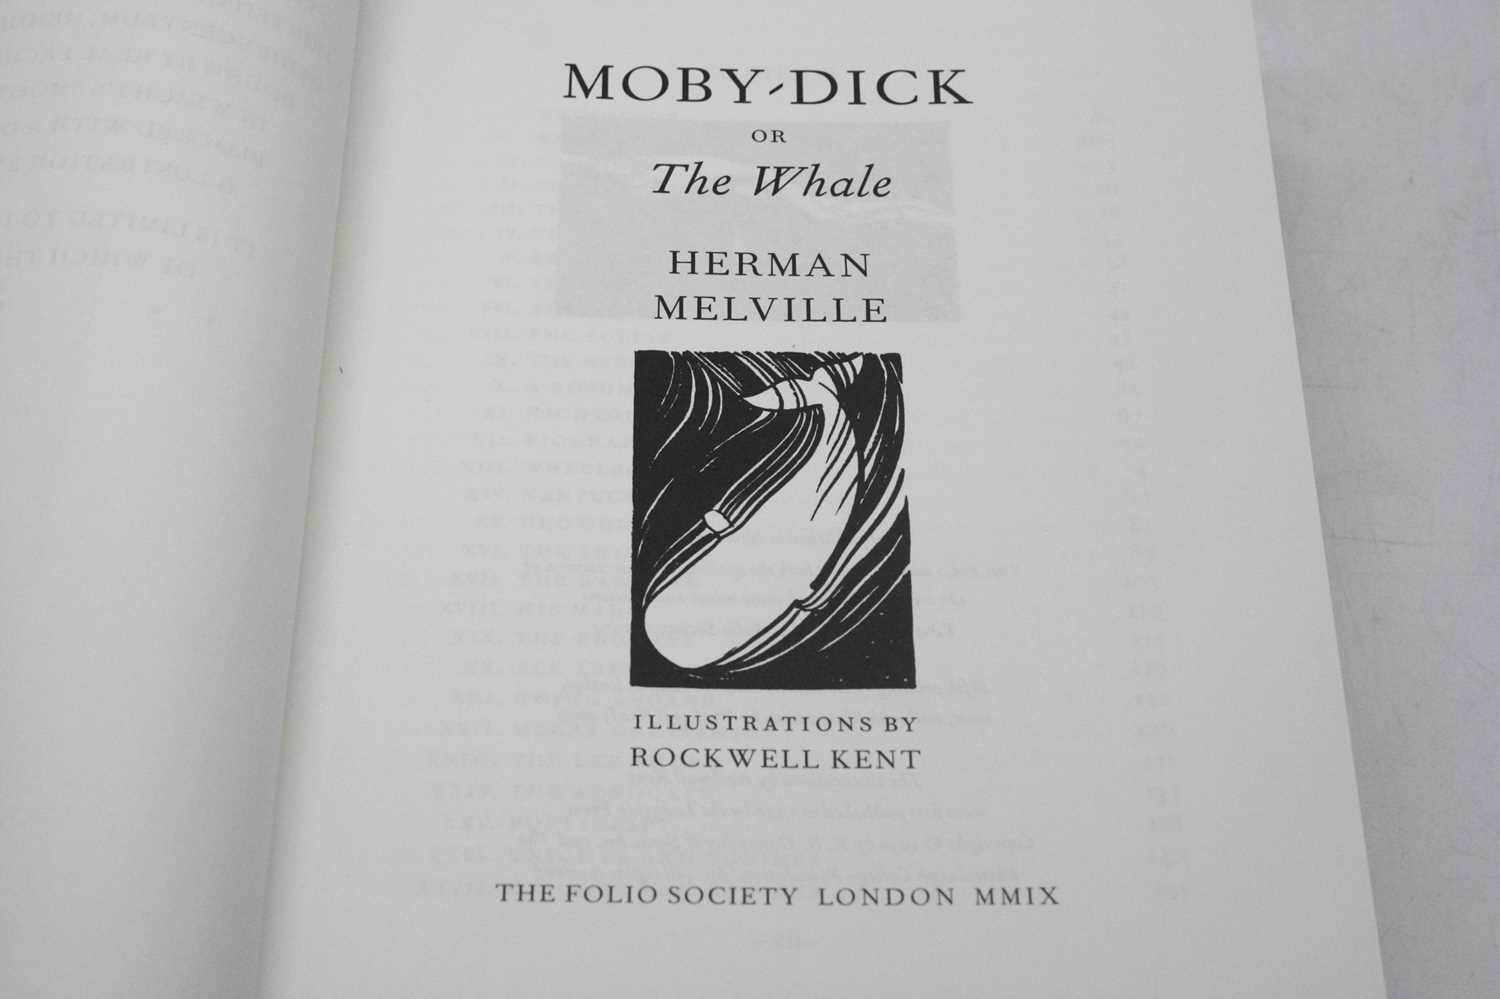 Melville, Herman: Moby Dick Or The Whale, Illustrations By Rockwell Kent, The Folio Society London - Image 2 of 3